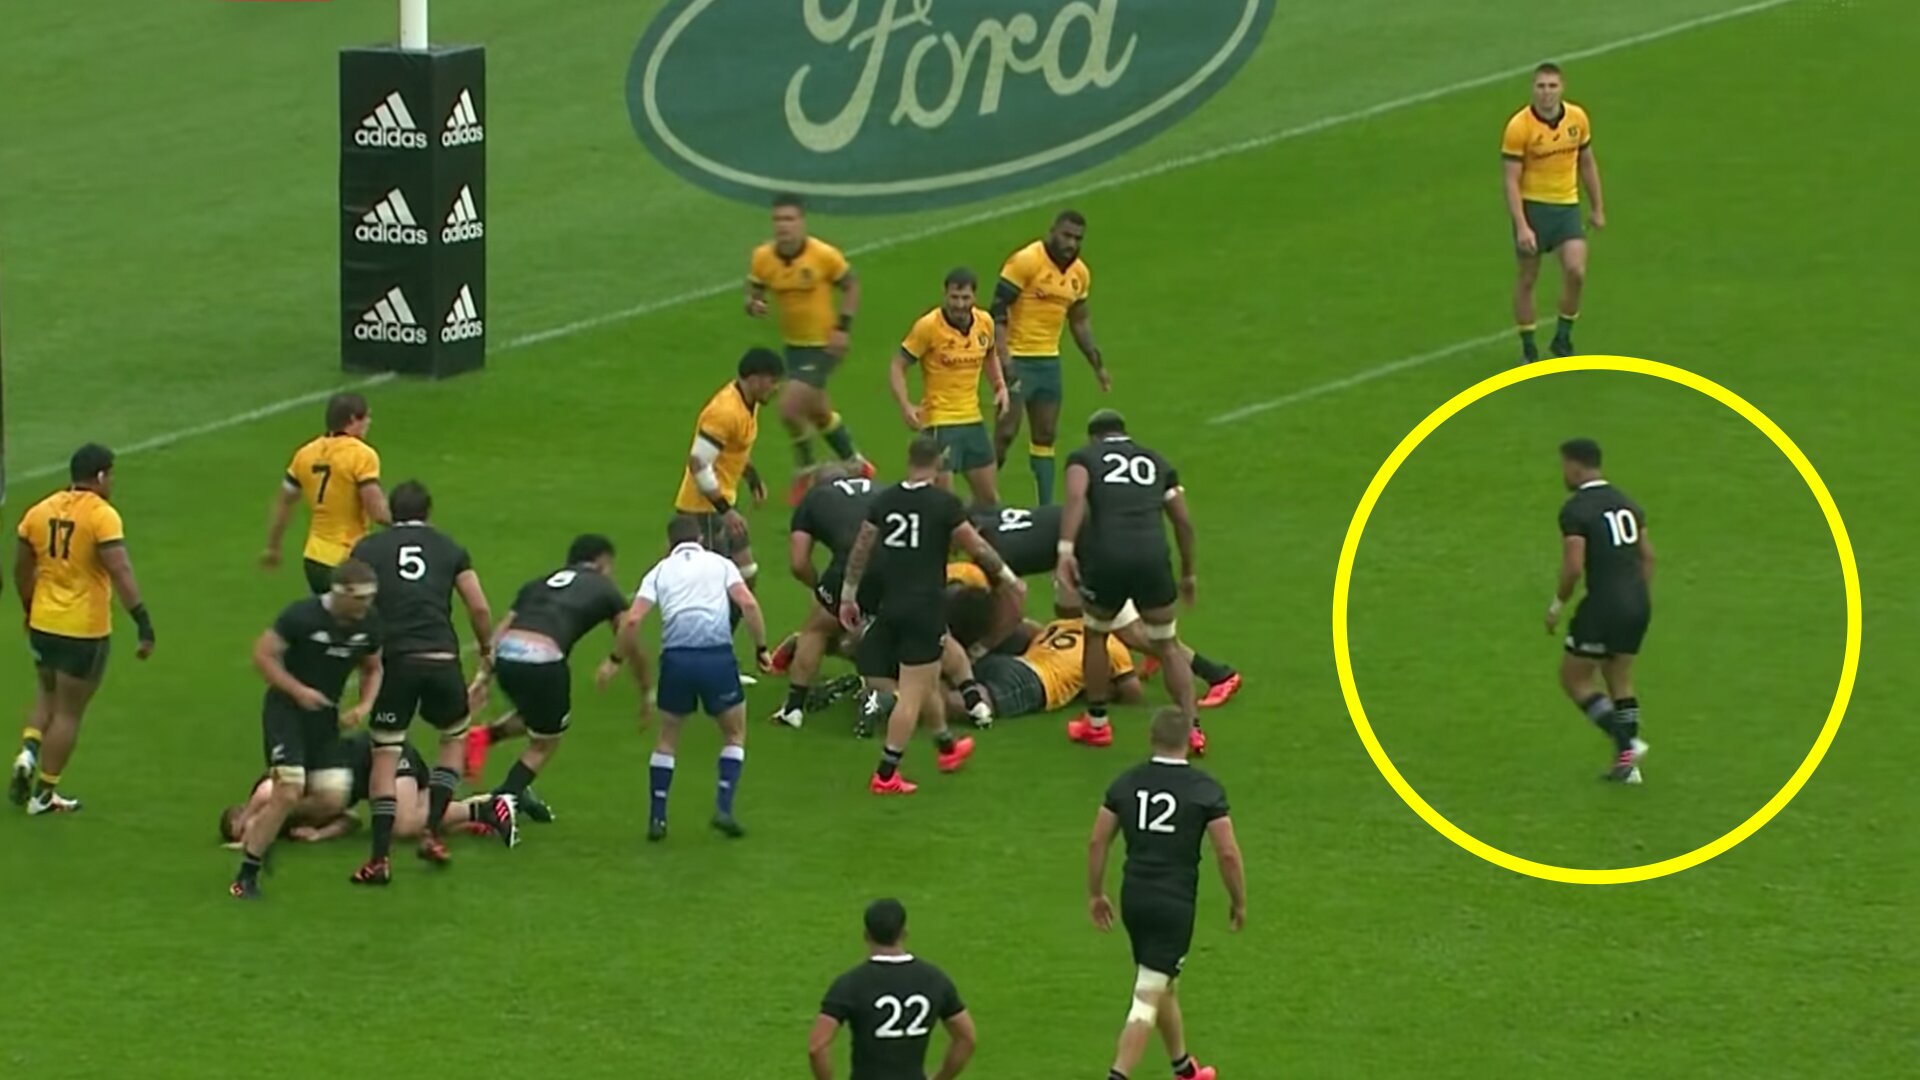 Footage proves Richie Mo'unga purposely hid away from winning drop kick chance in Bledisloe Cup